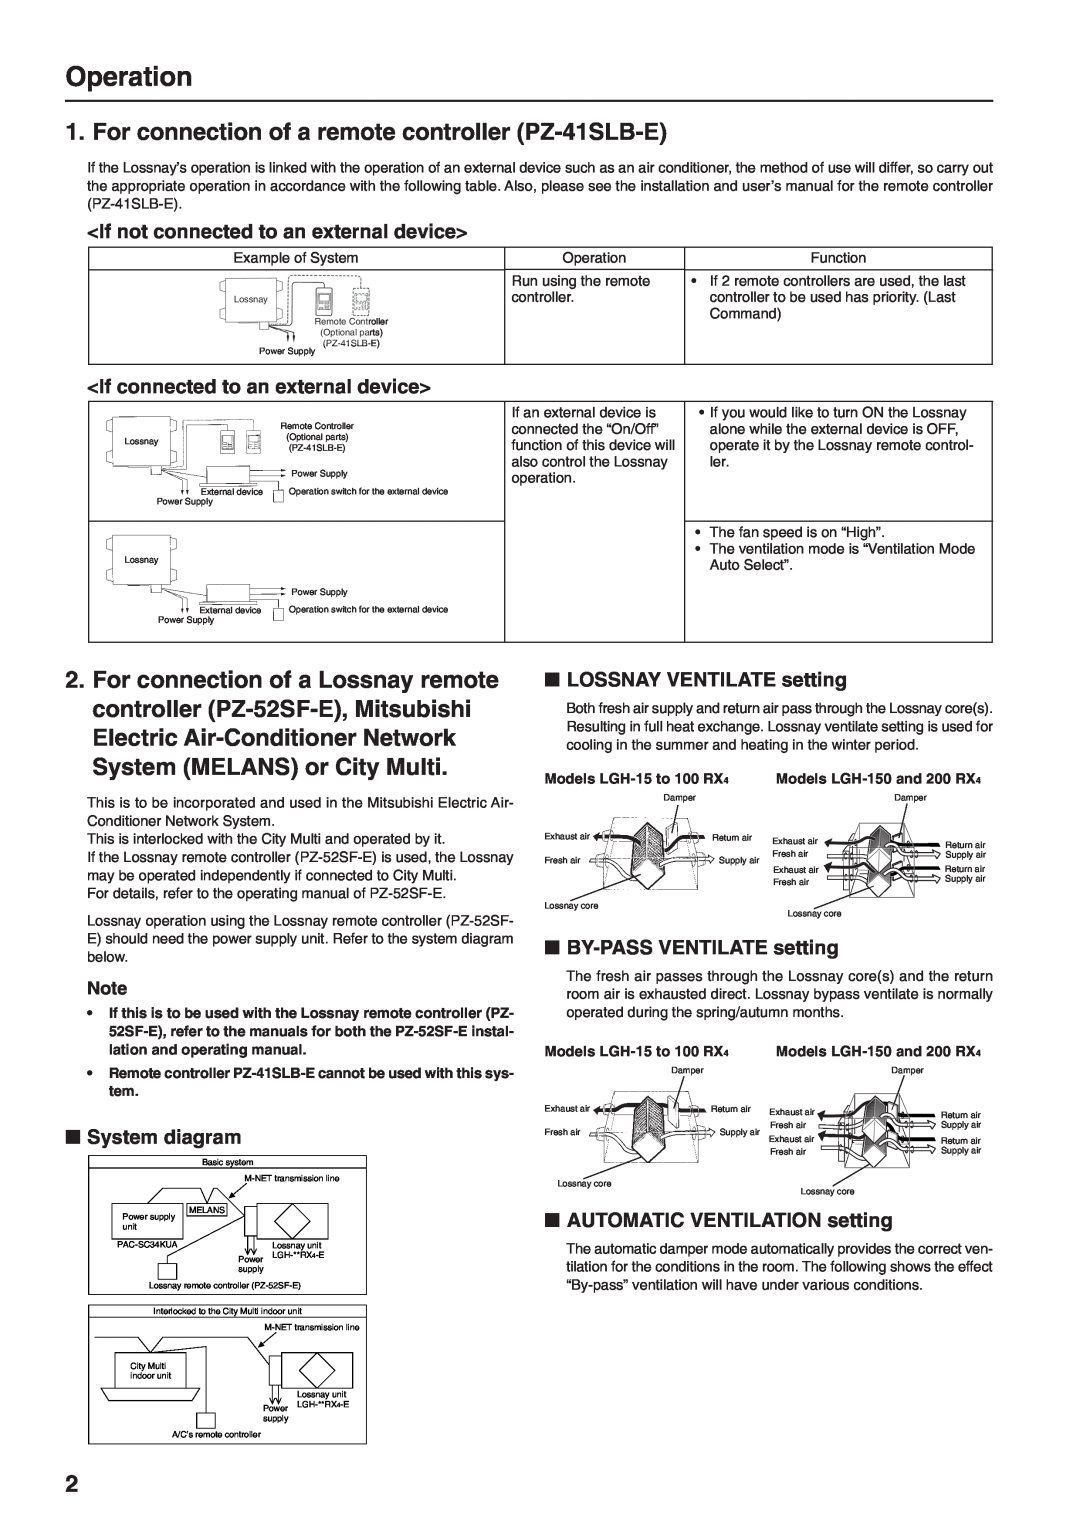 Mitsubishi Electronics LGH-80RX4-E manual Operation, For connection of a remote controller PZ-41SLB-E, System diagram 